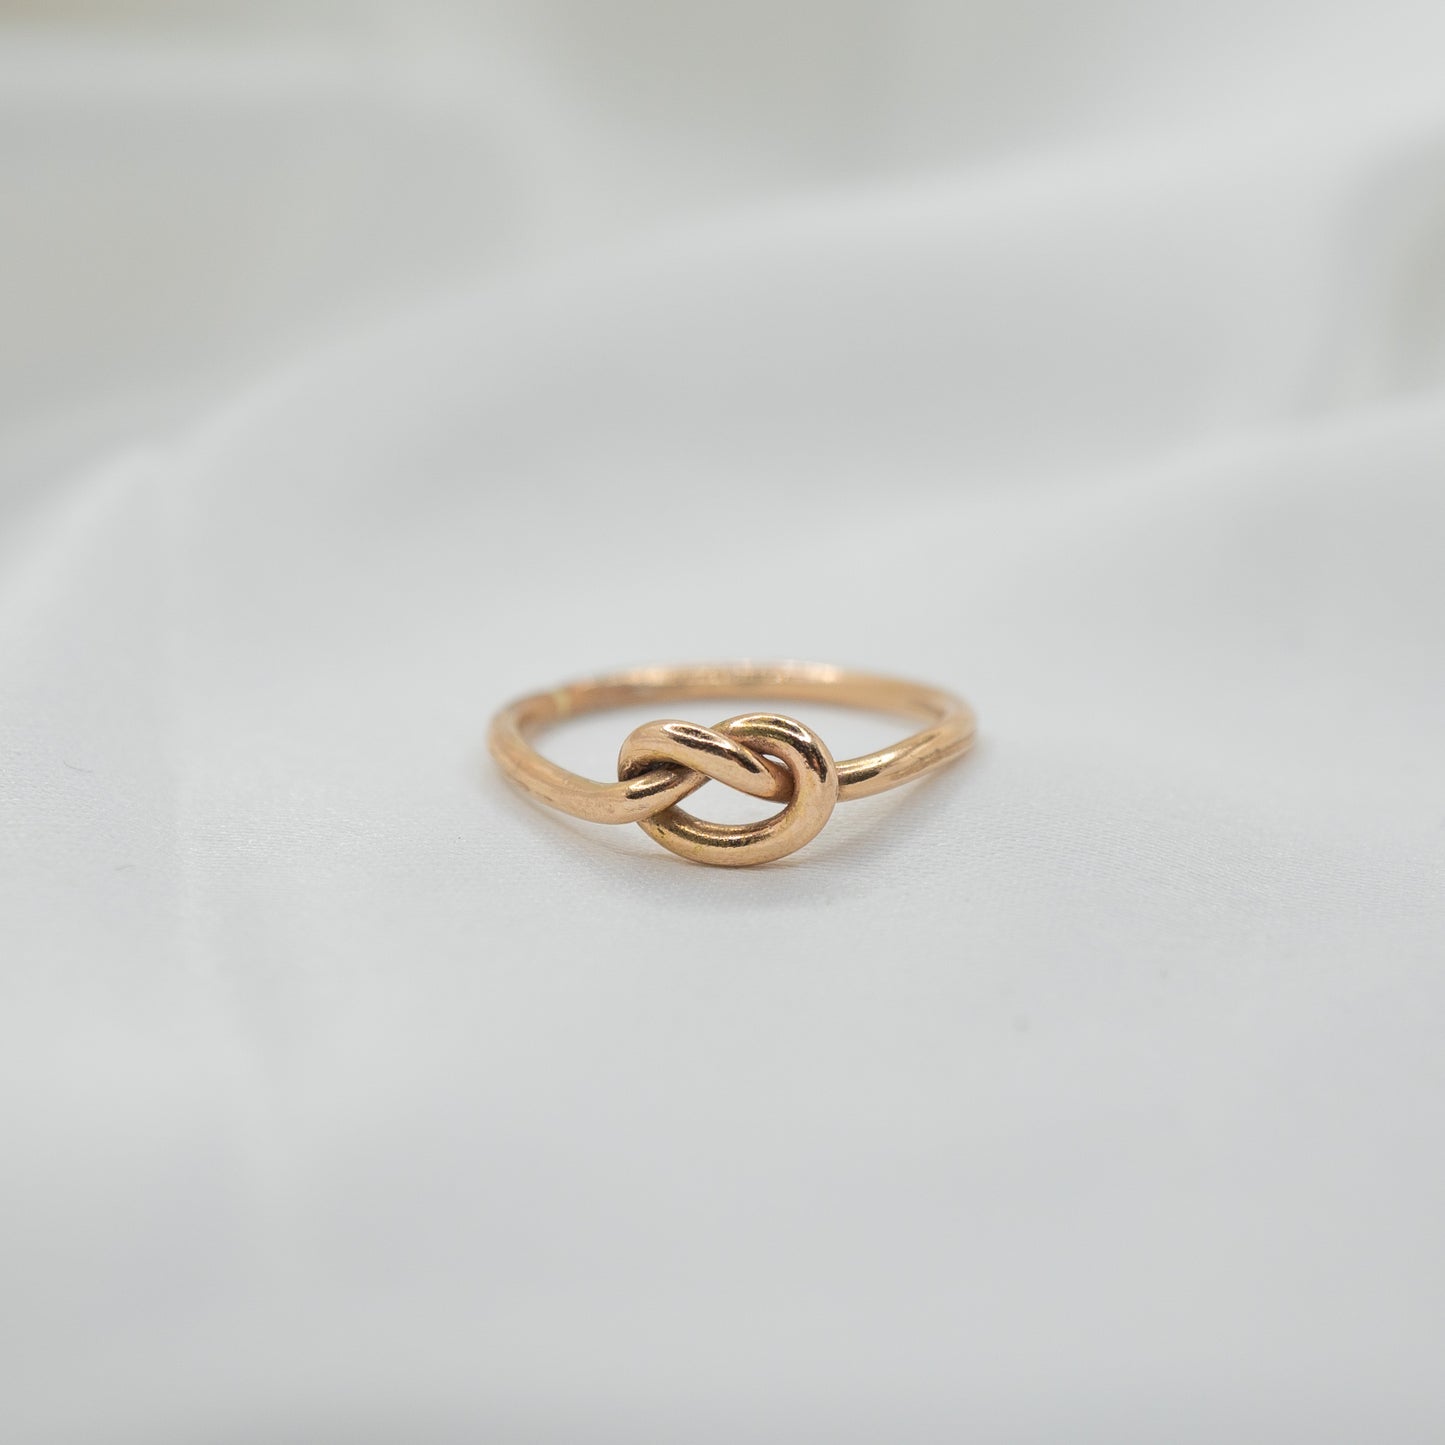 Gold Filled Knot Ring - shot on white - front view